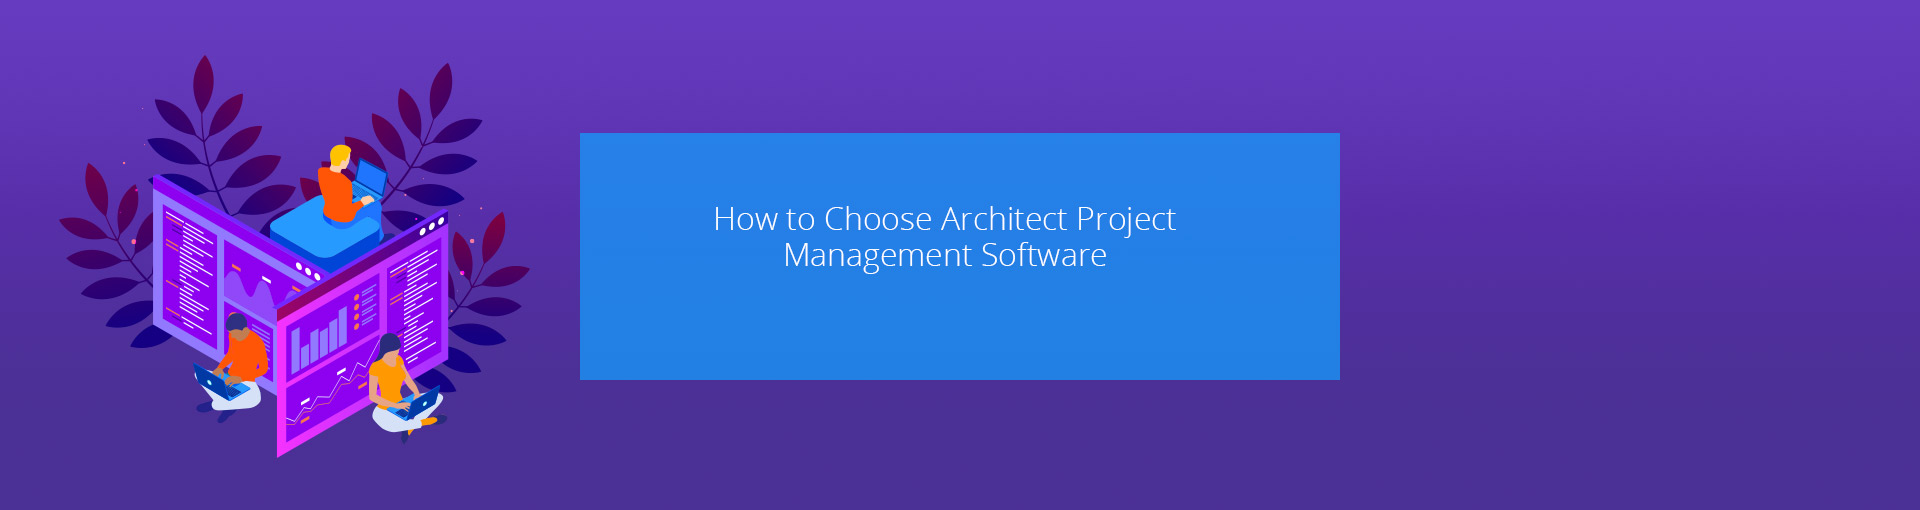 How to Choose Architect Project Management Software